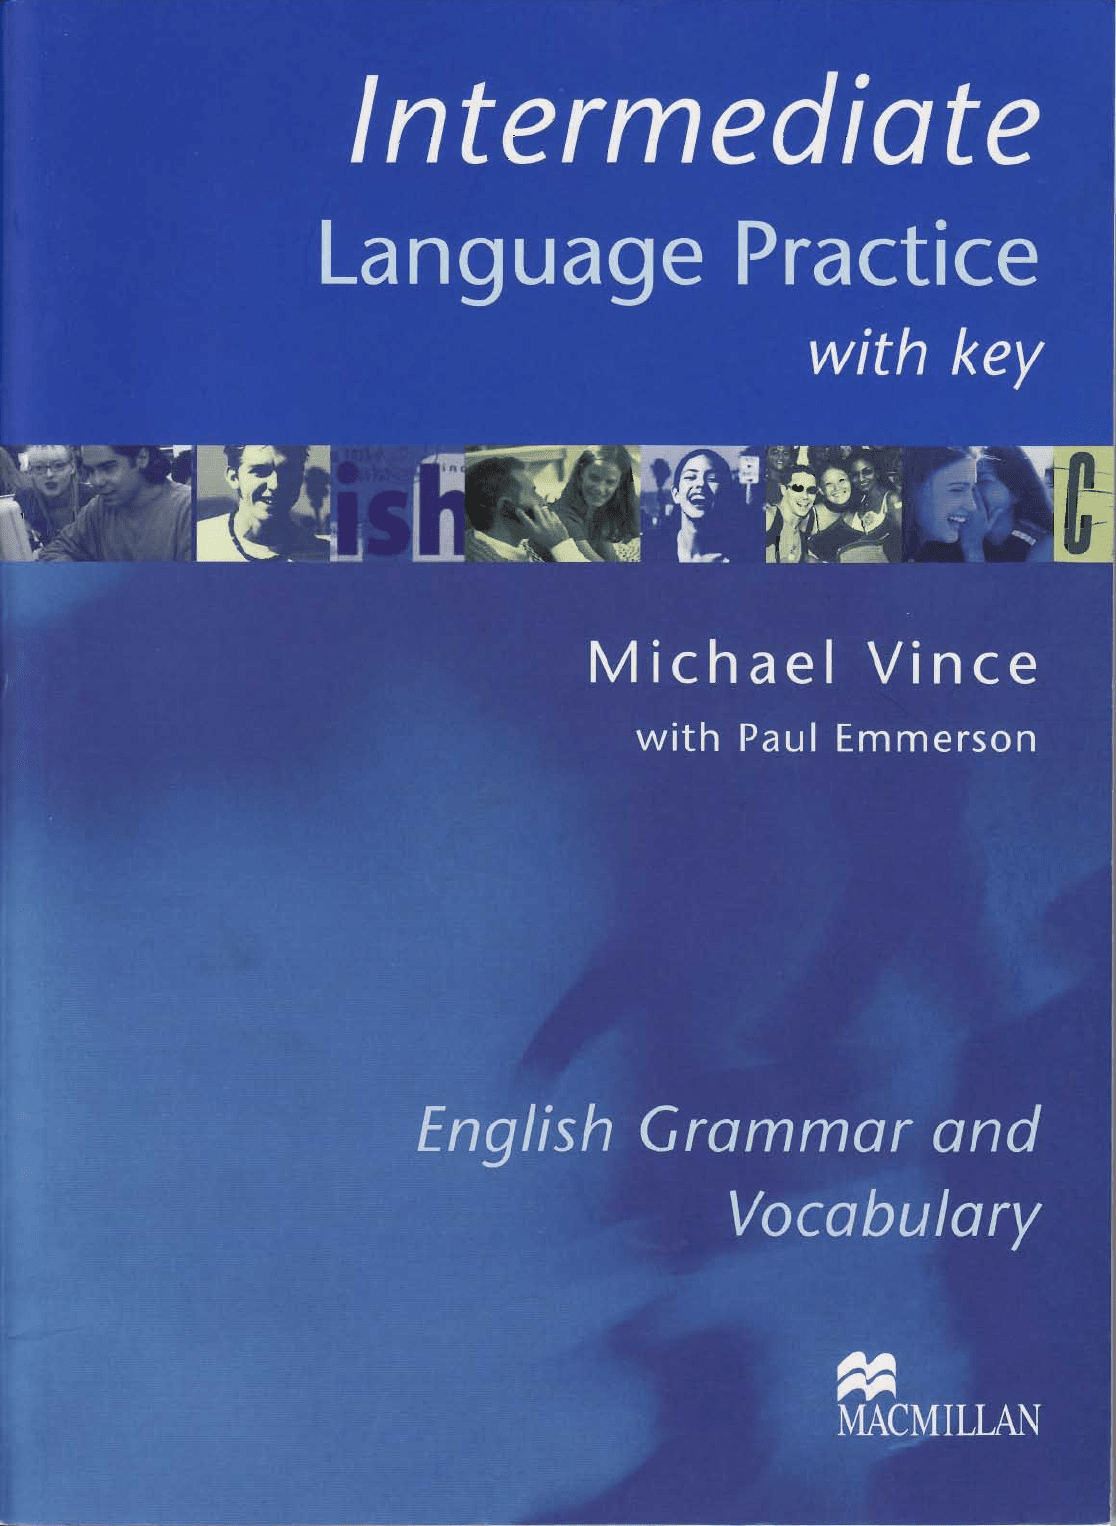 vince-michael-emmerson-paul-intermediate-language-practice-with-key-english-grammar-and